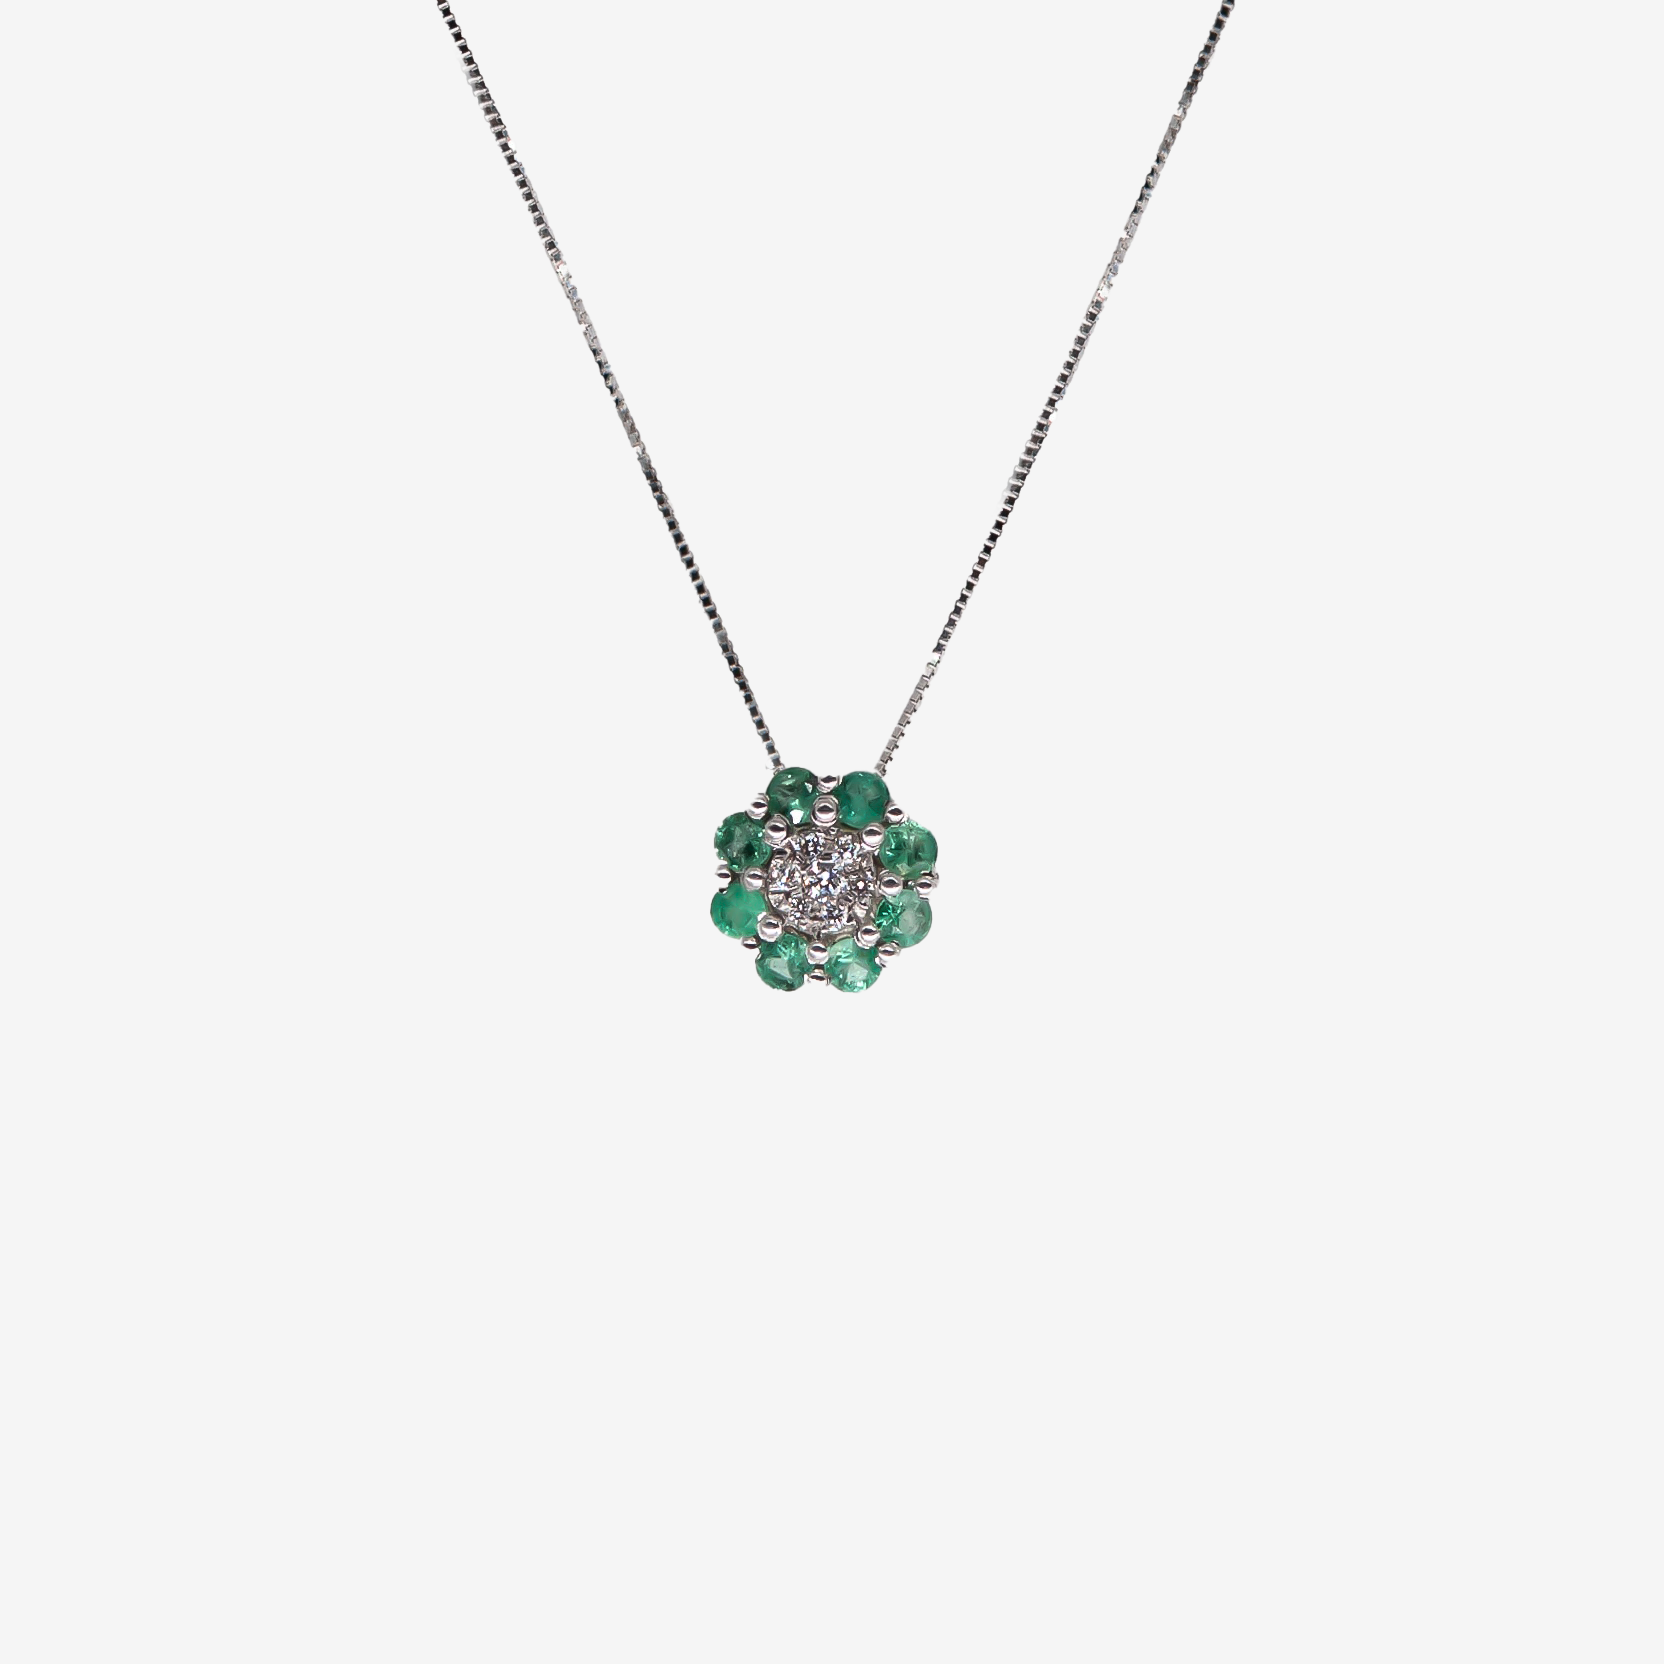 Flower necklace with emeralds